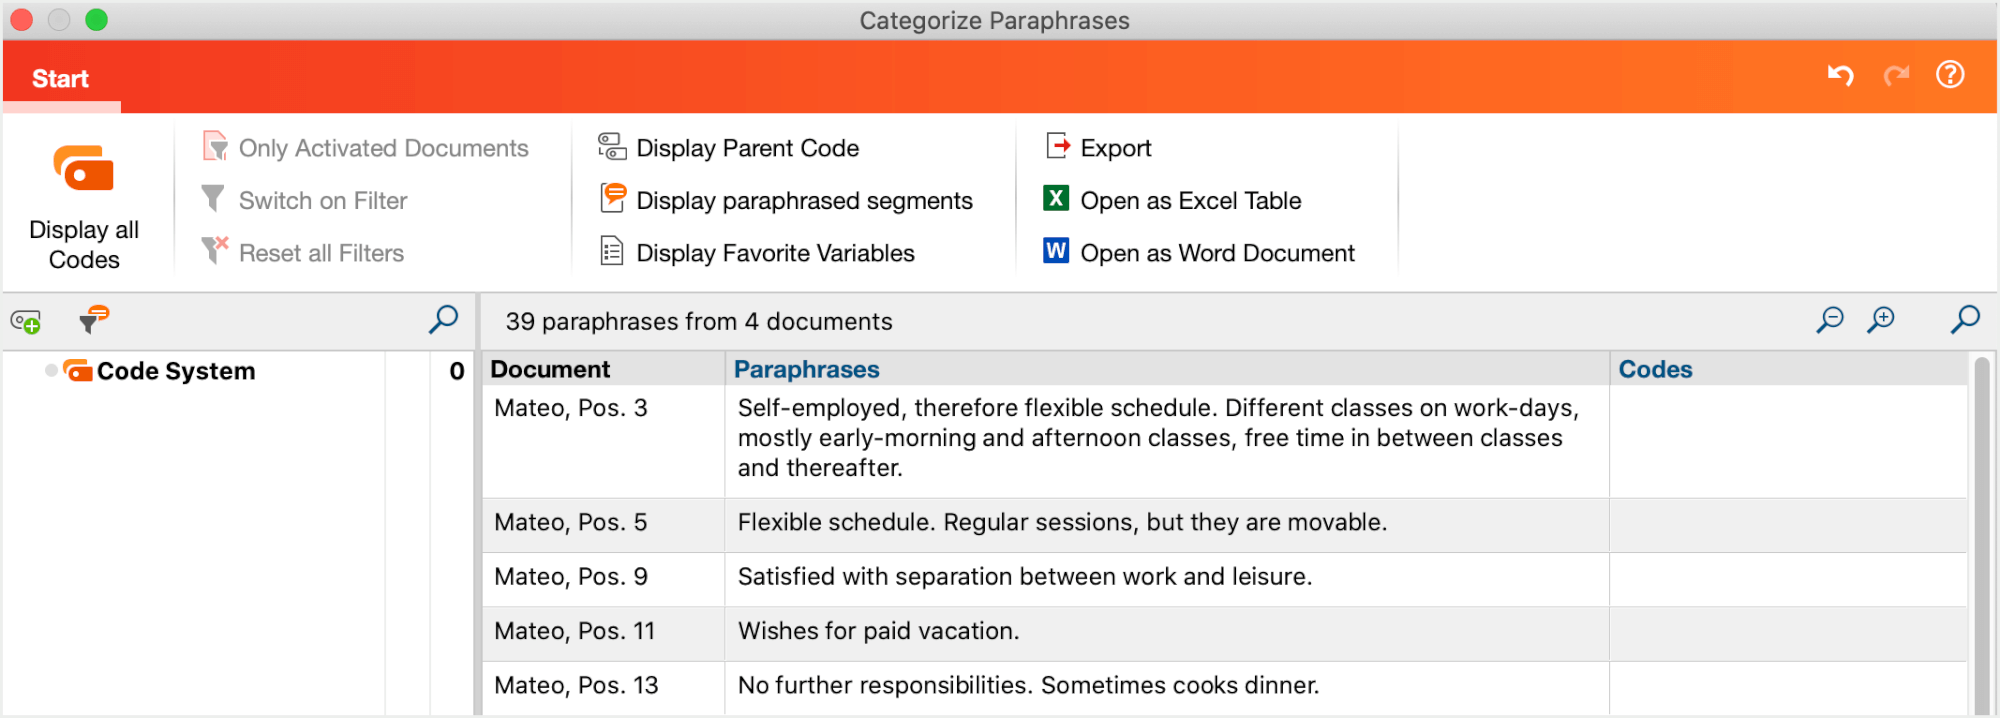 Interactive table window for categorizing paraphrases